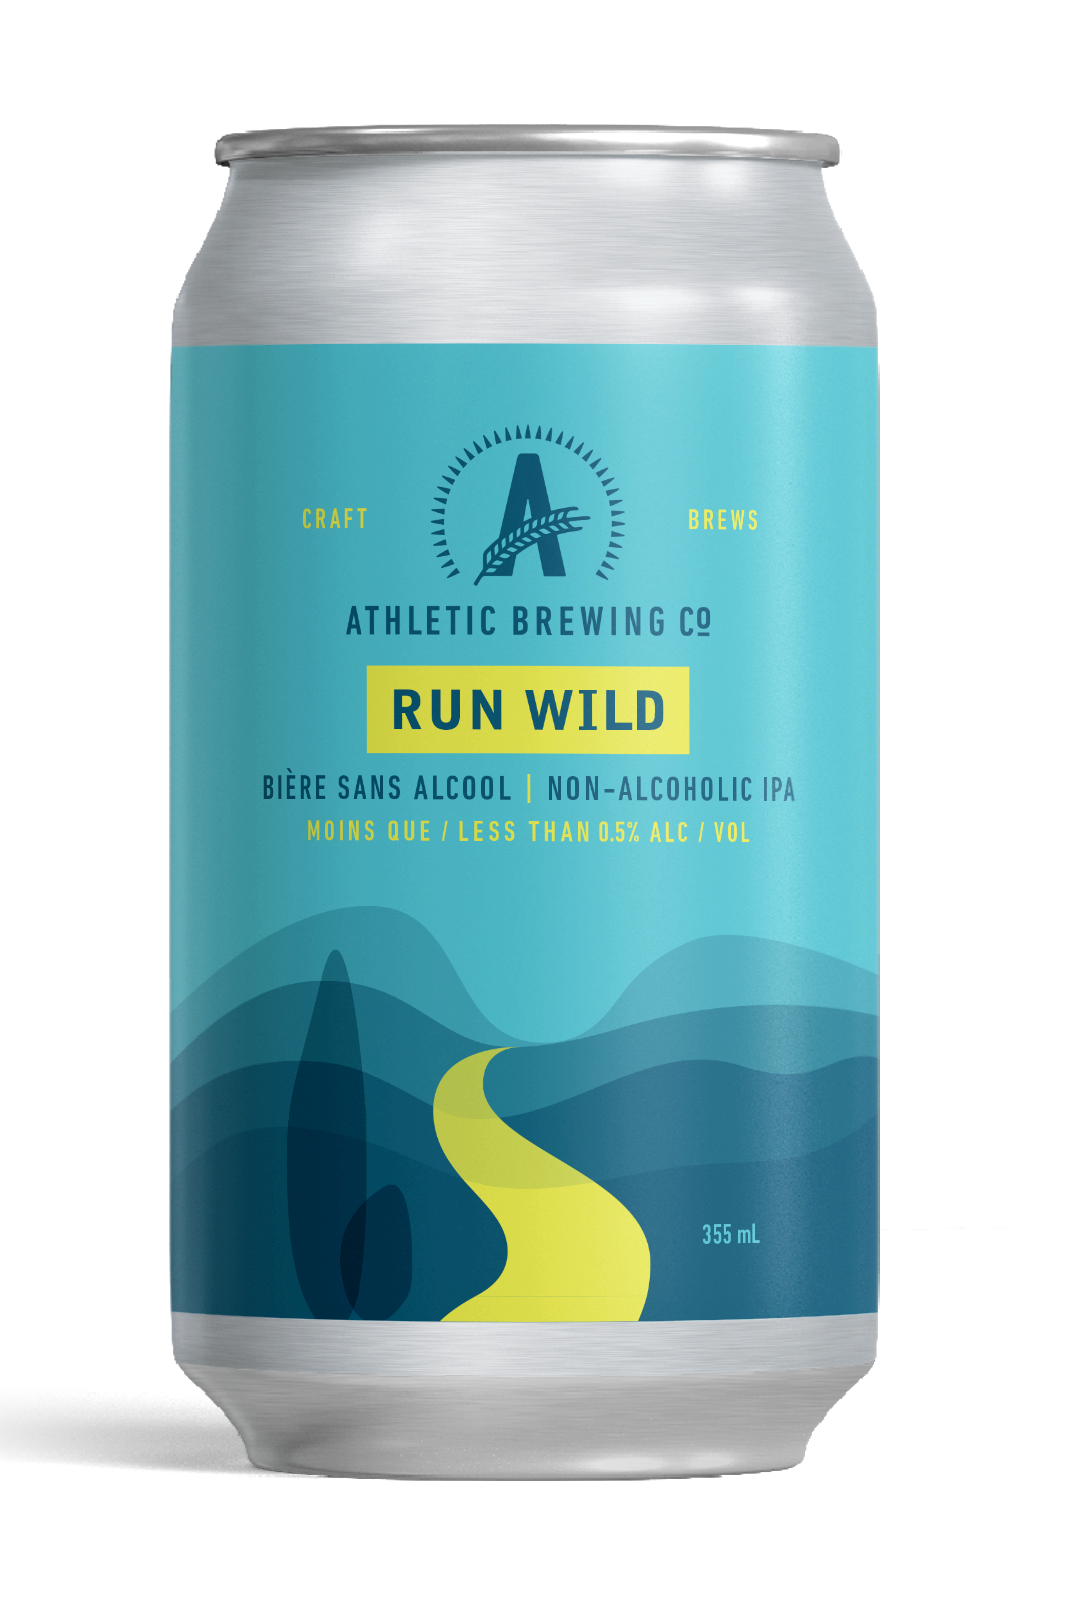 Athletic Brewing Co. becomes the latest to join the TCS Toronto Waterfront Marathon